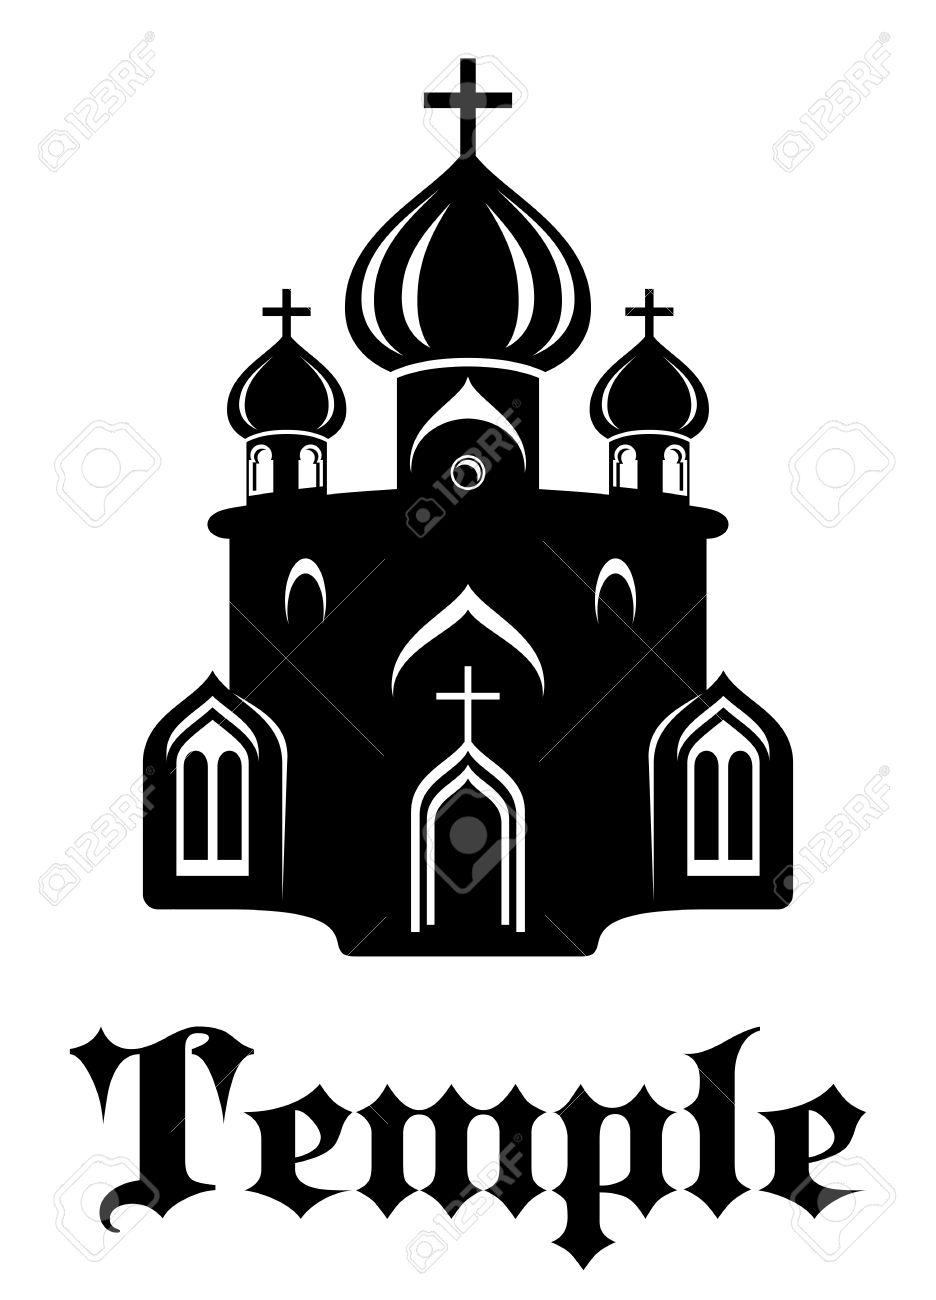 Black And White Silhouette Of Christian Temple Or Church With.